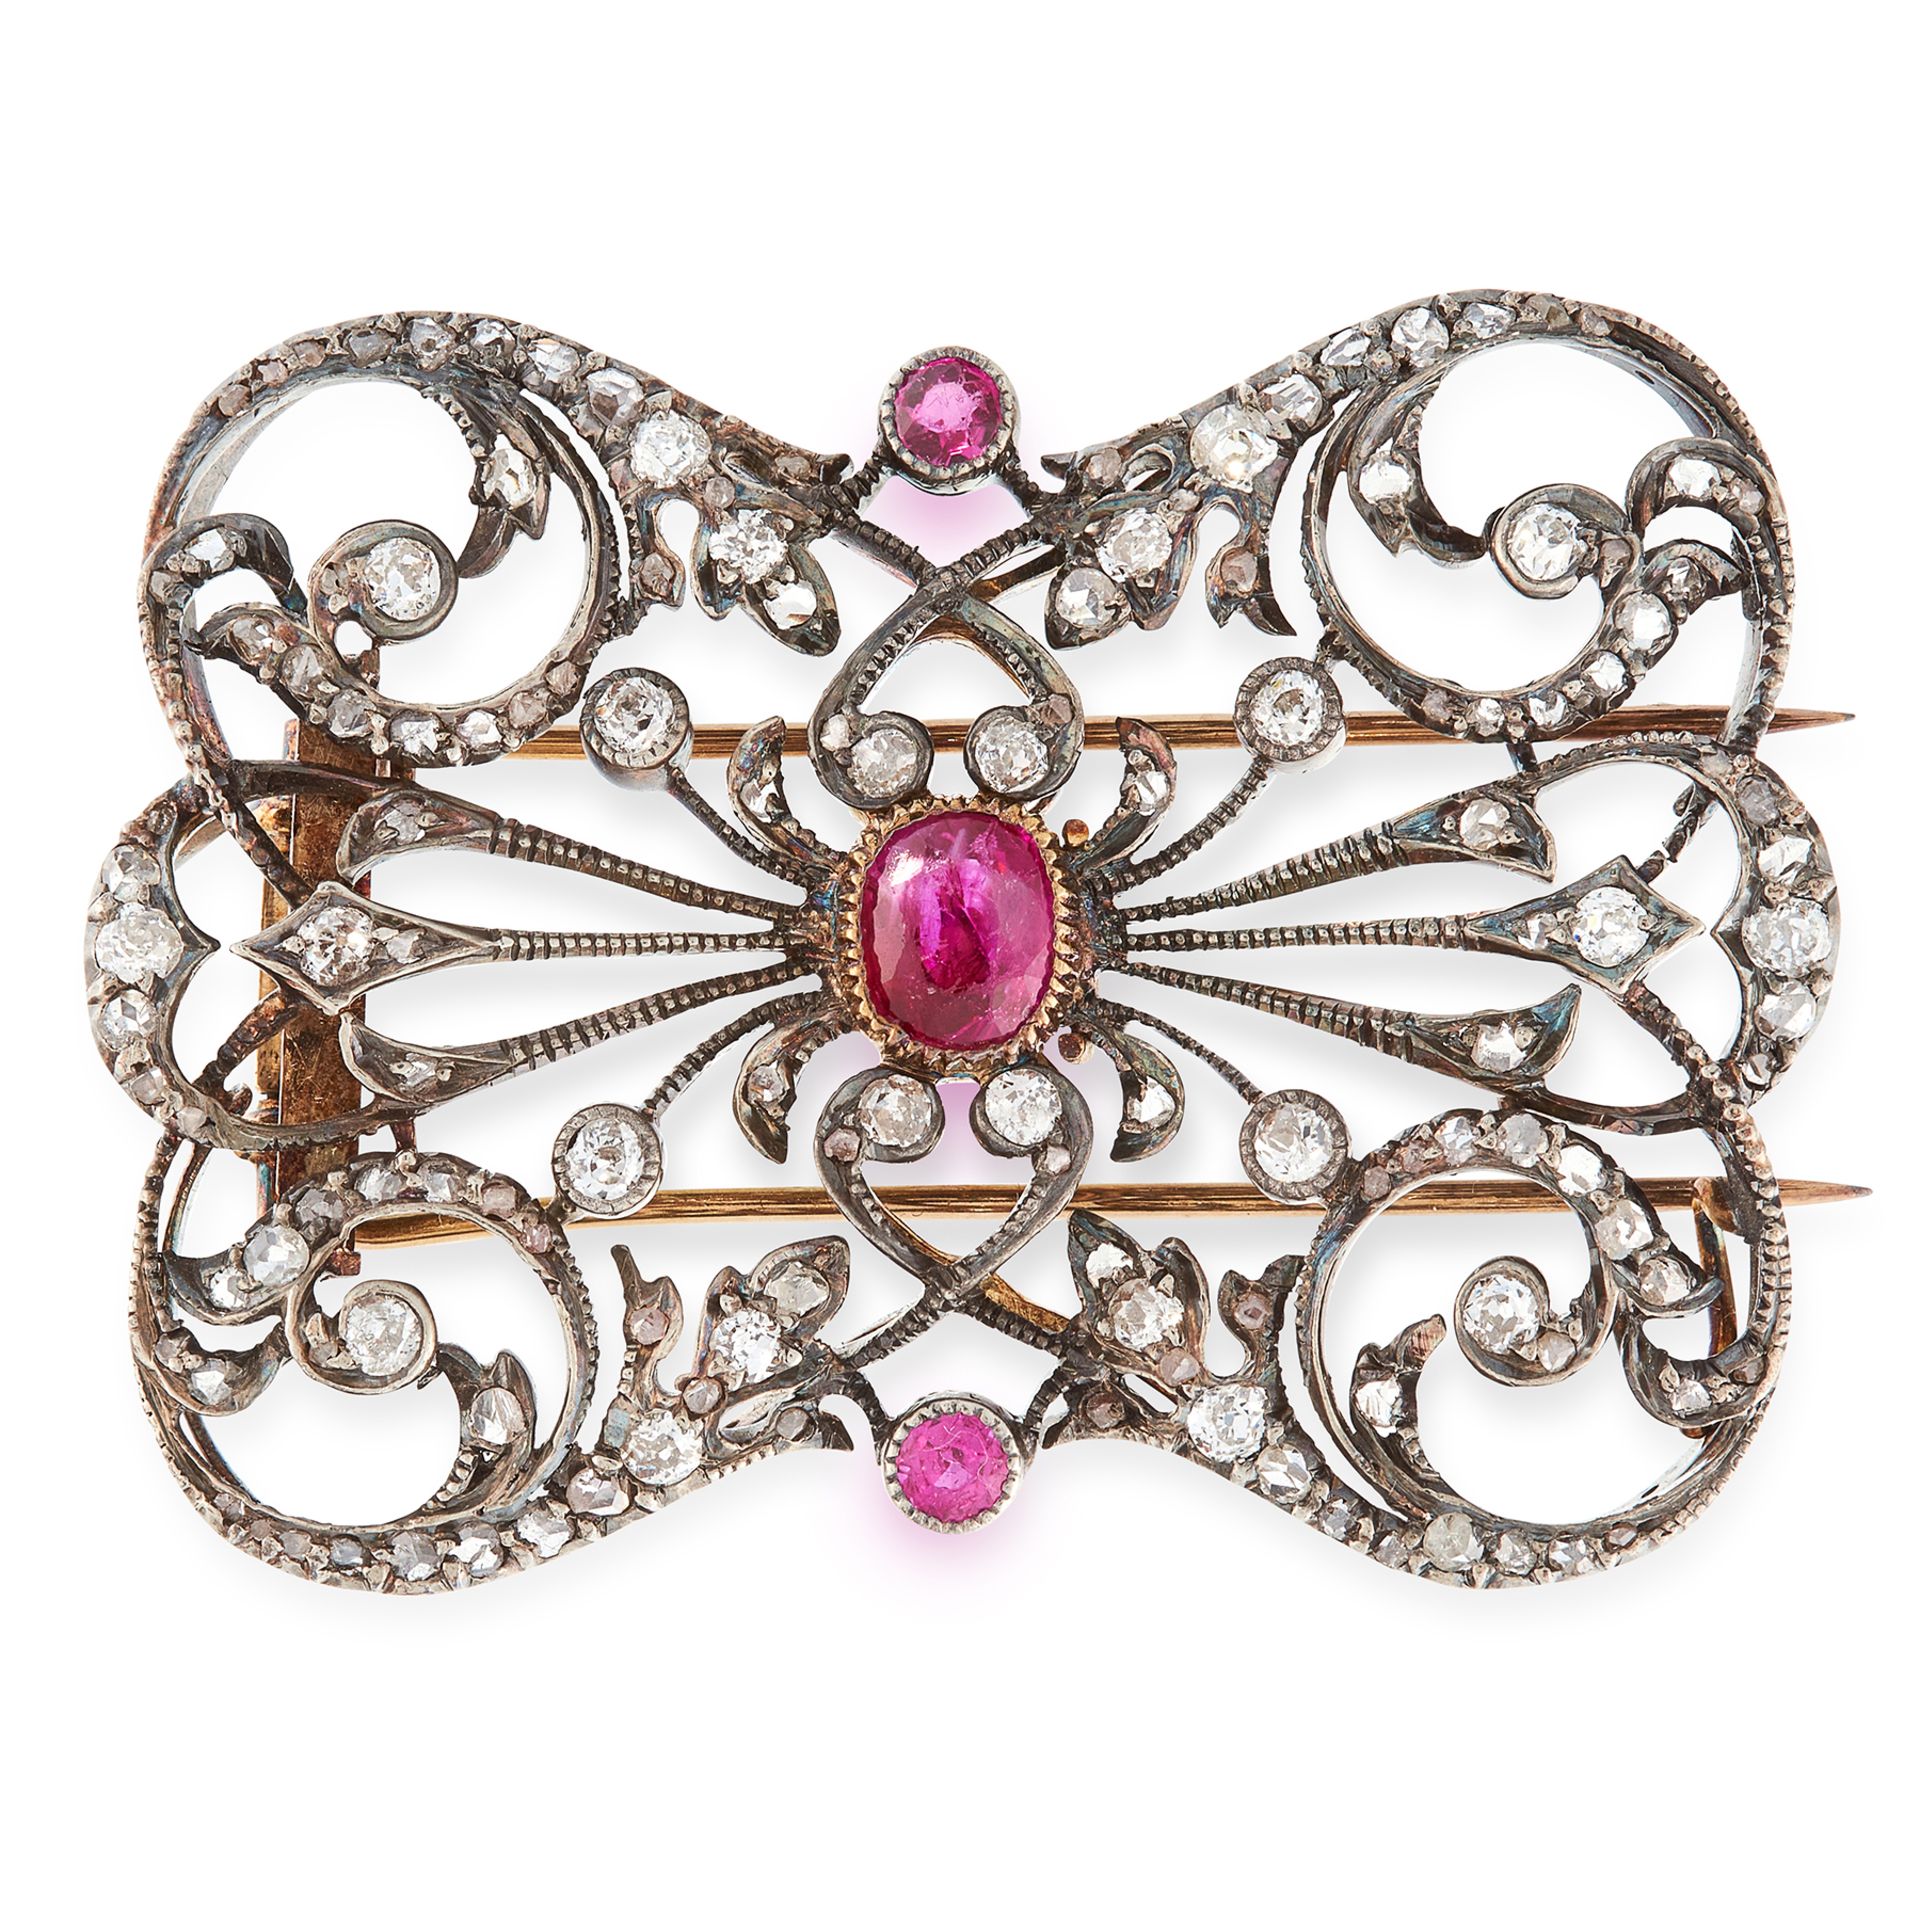 AN ANTIQUE DIAMOND AND RUBY BROOCH in yellow gold and silver, in open framework design, set with